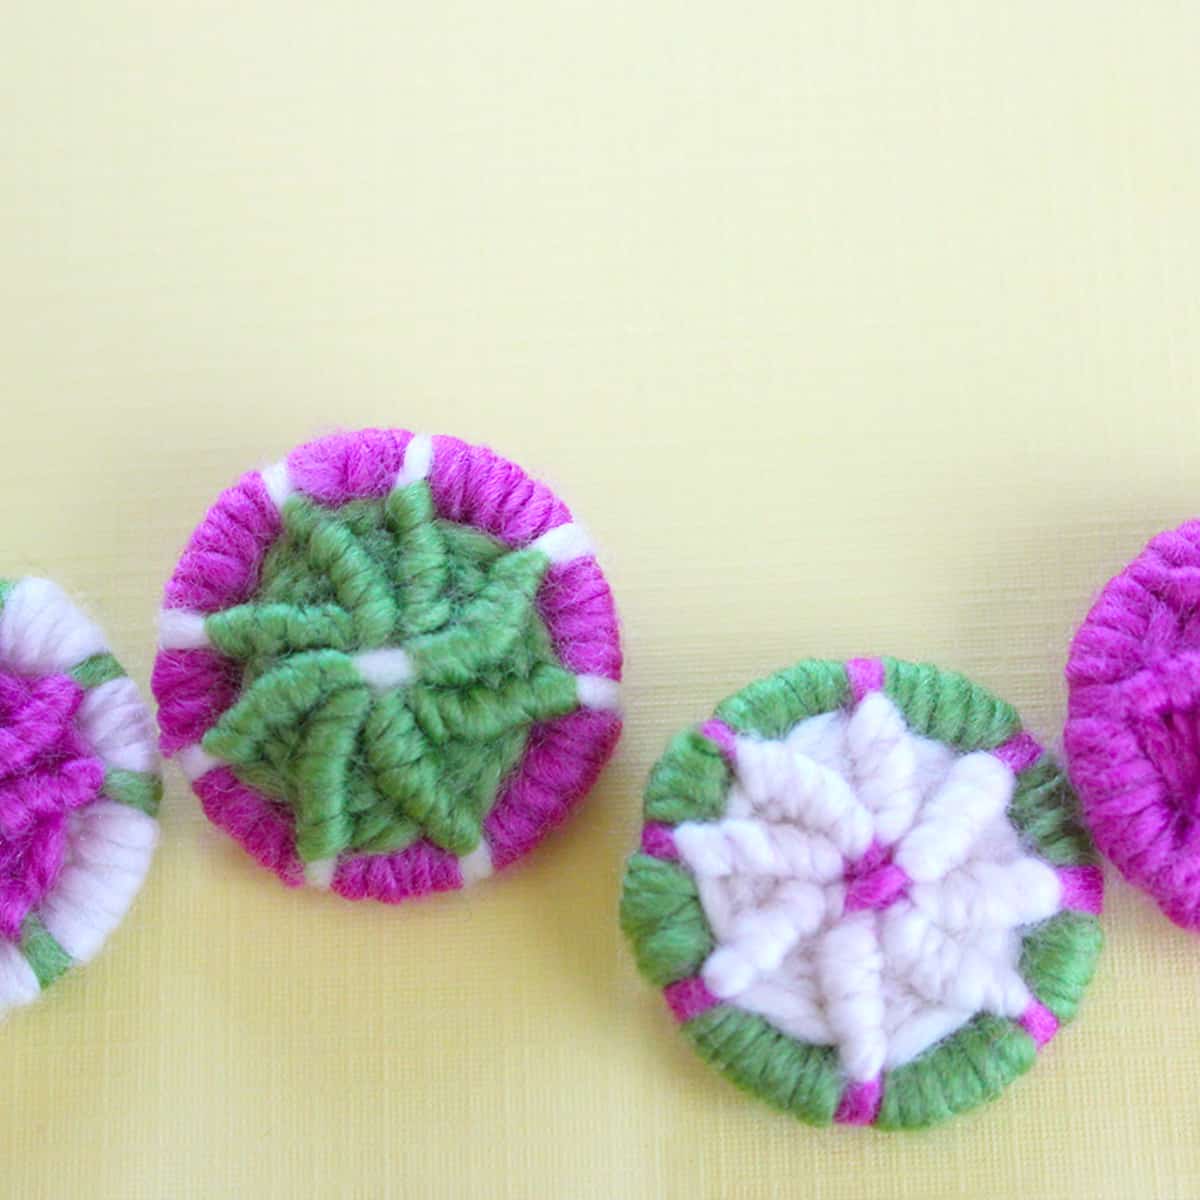 How to Craft Yarn Dorset Buttons - Studio Knit